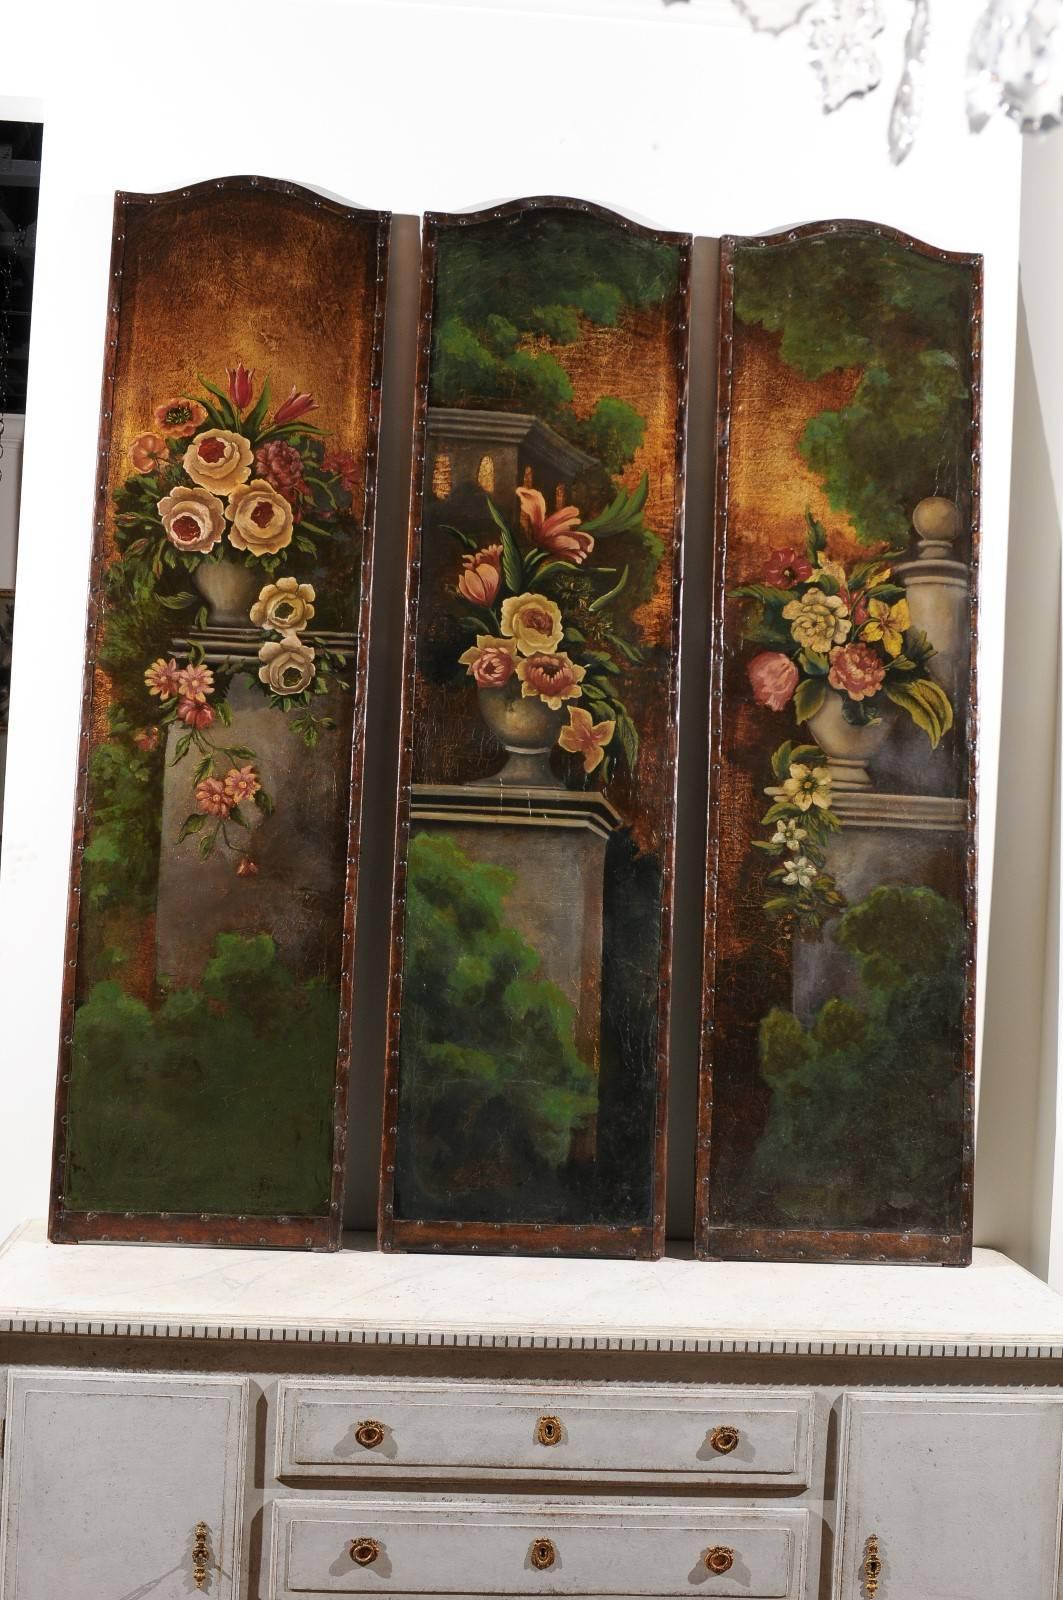 A set of three English leather painted panels with floral and architectural motifs from the late 19th century. We were immediately charmed by this exquisite set of three decorative panels. Born in England during the 19th century, they each depict